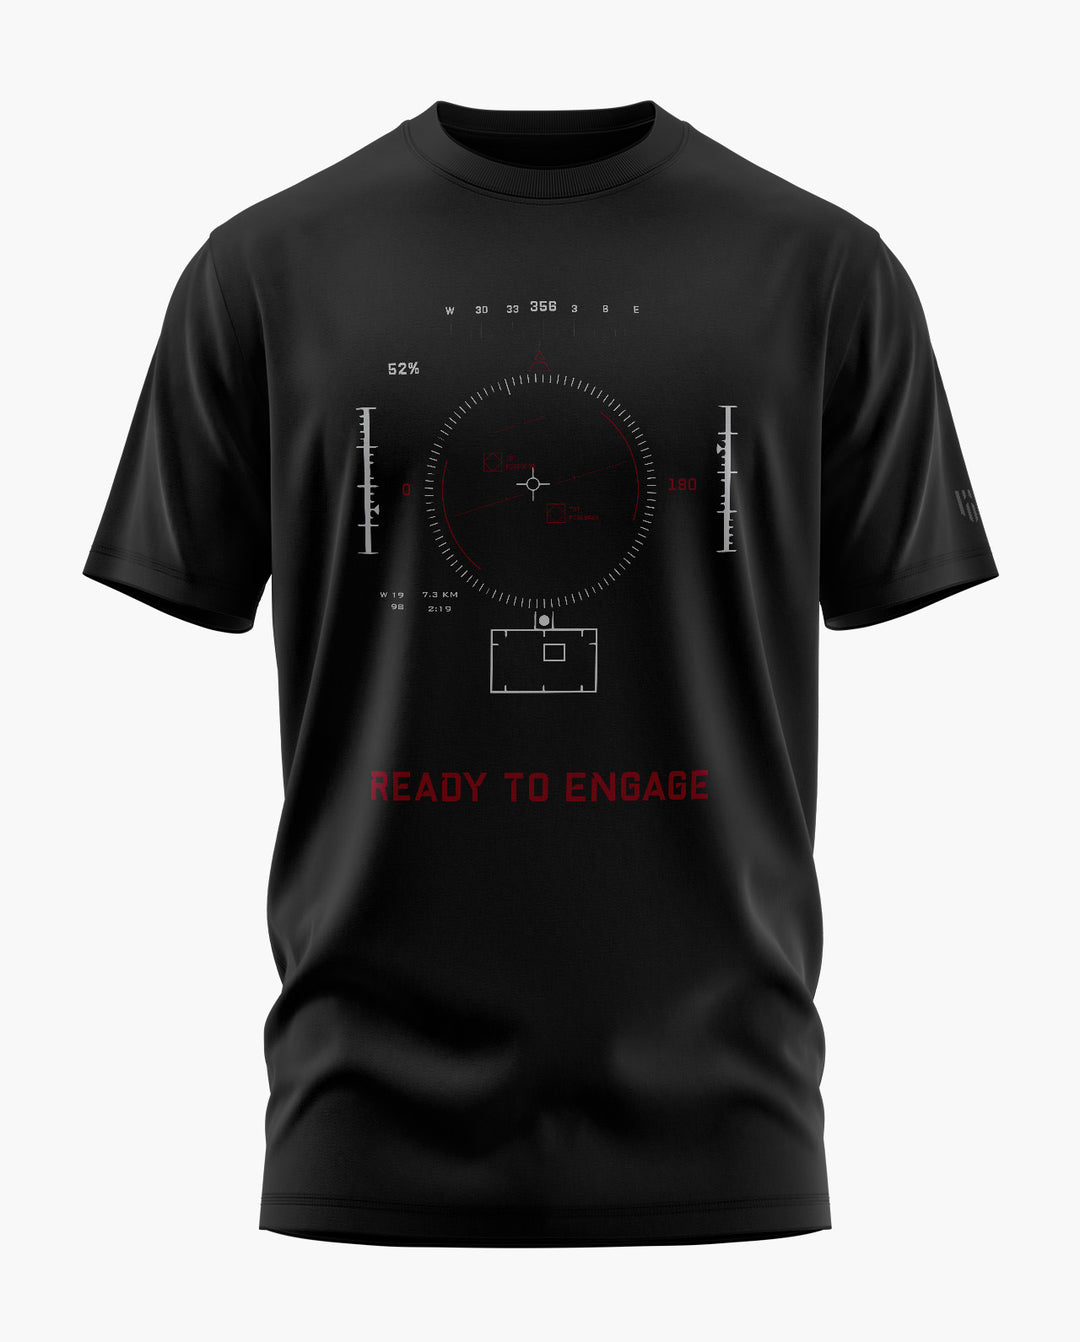 READY TO ENGAGE T-Shirt